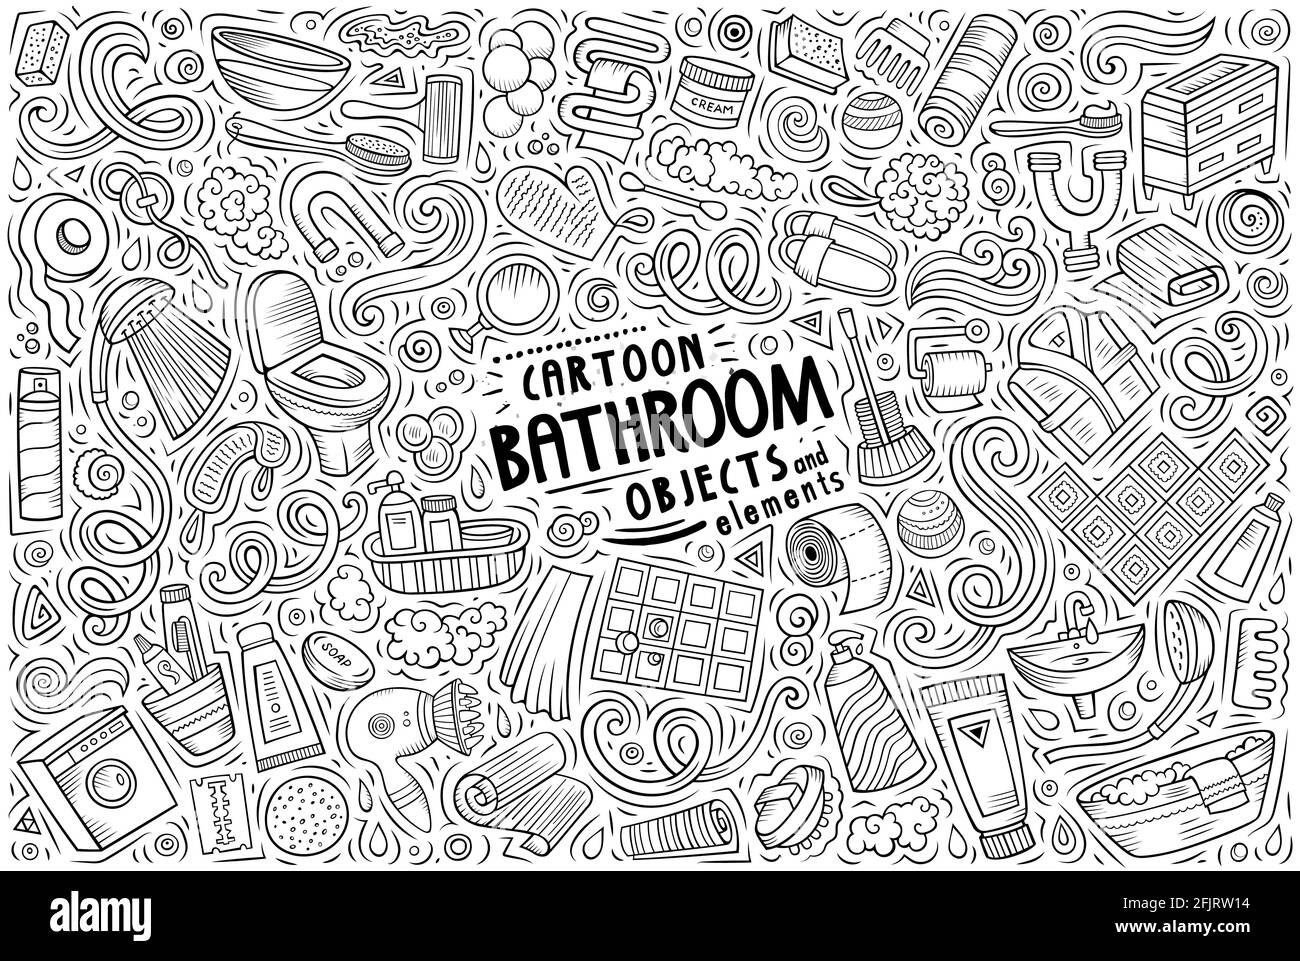 Line art vector hand drawn doodle cartoon set of Bathroom theme items, objects and symbols Stock Vector